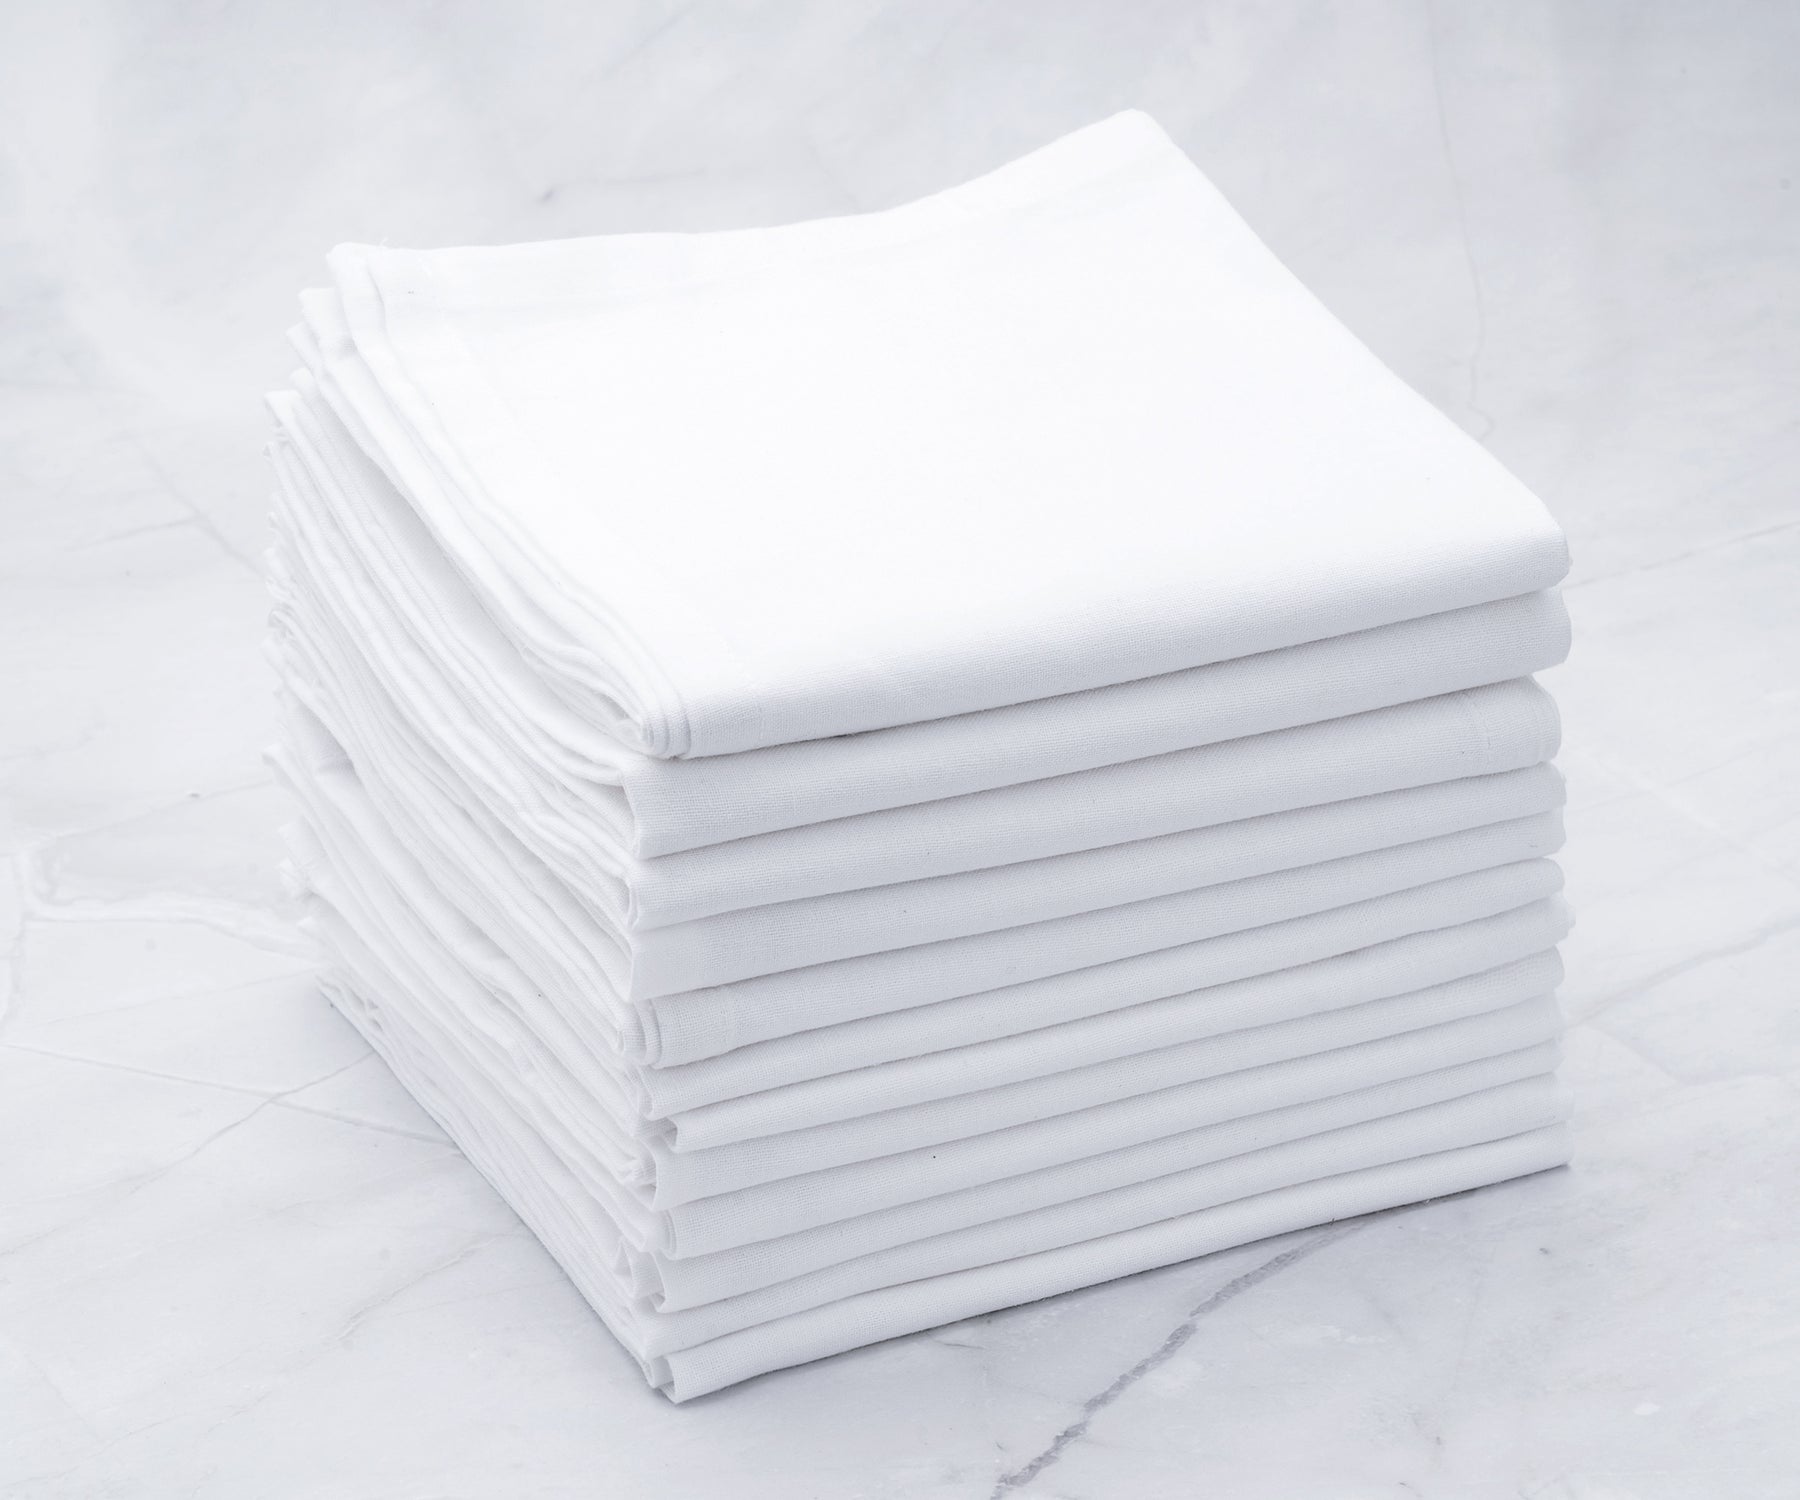 cotton dish towels are 100% cotton fabric, these linen dish towels are absorbent. flour sack tea towels.